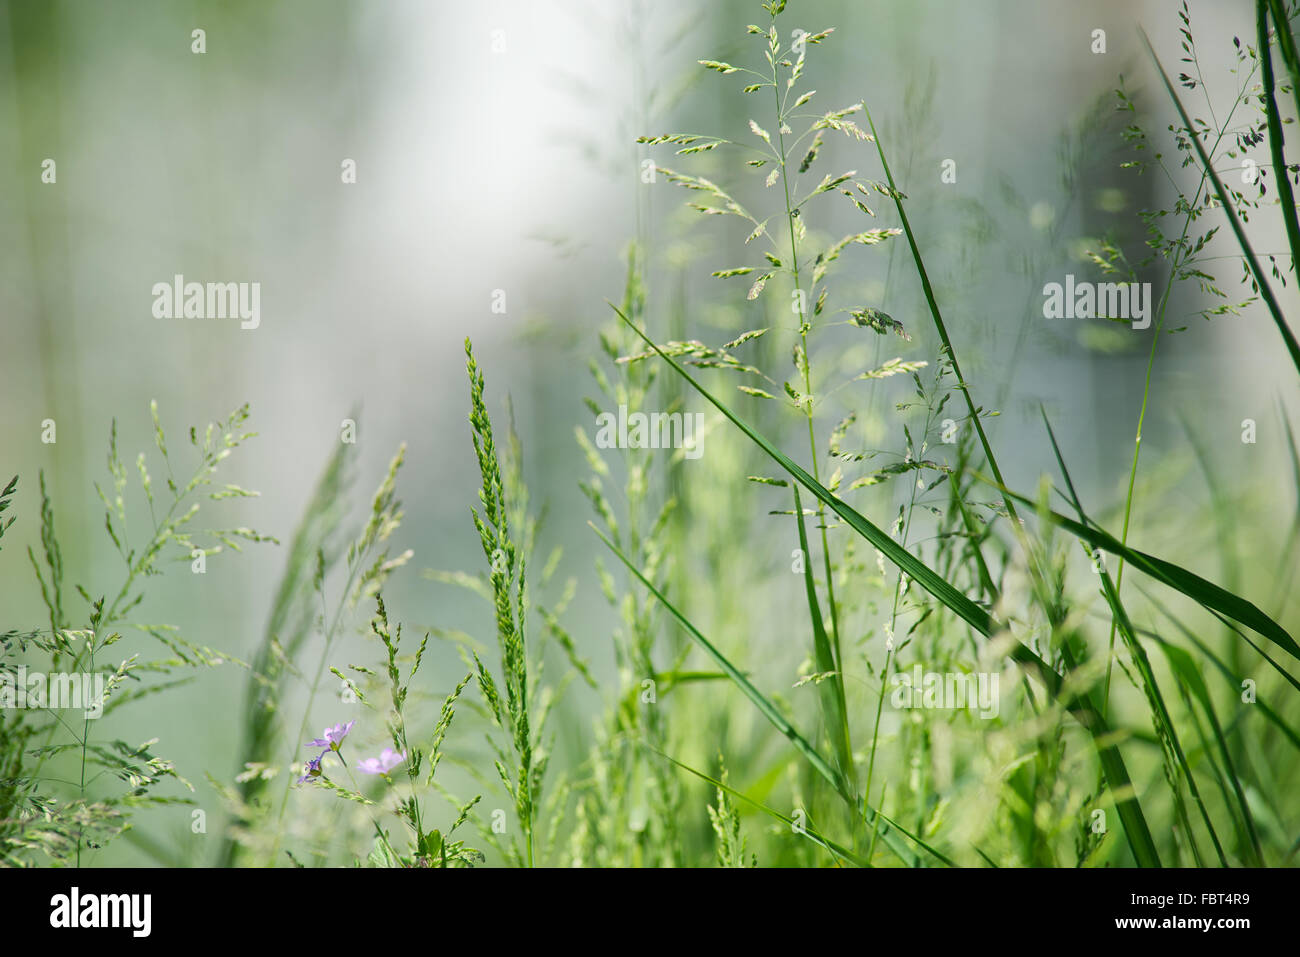 Close-up of grass and weeds Stock Photo